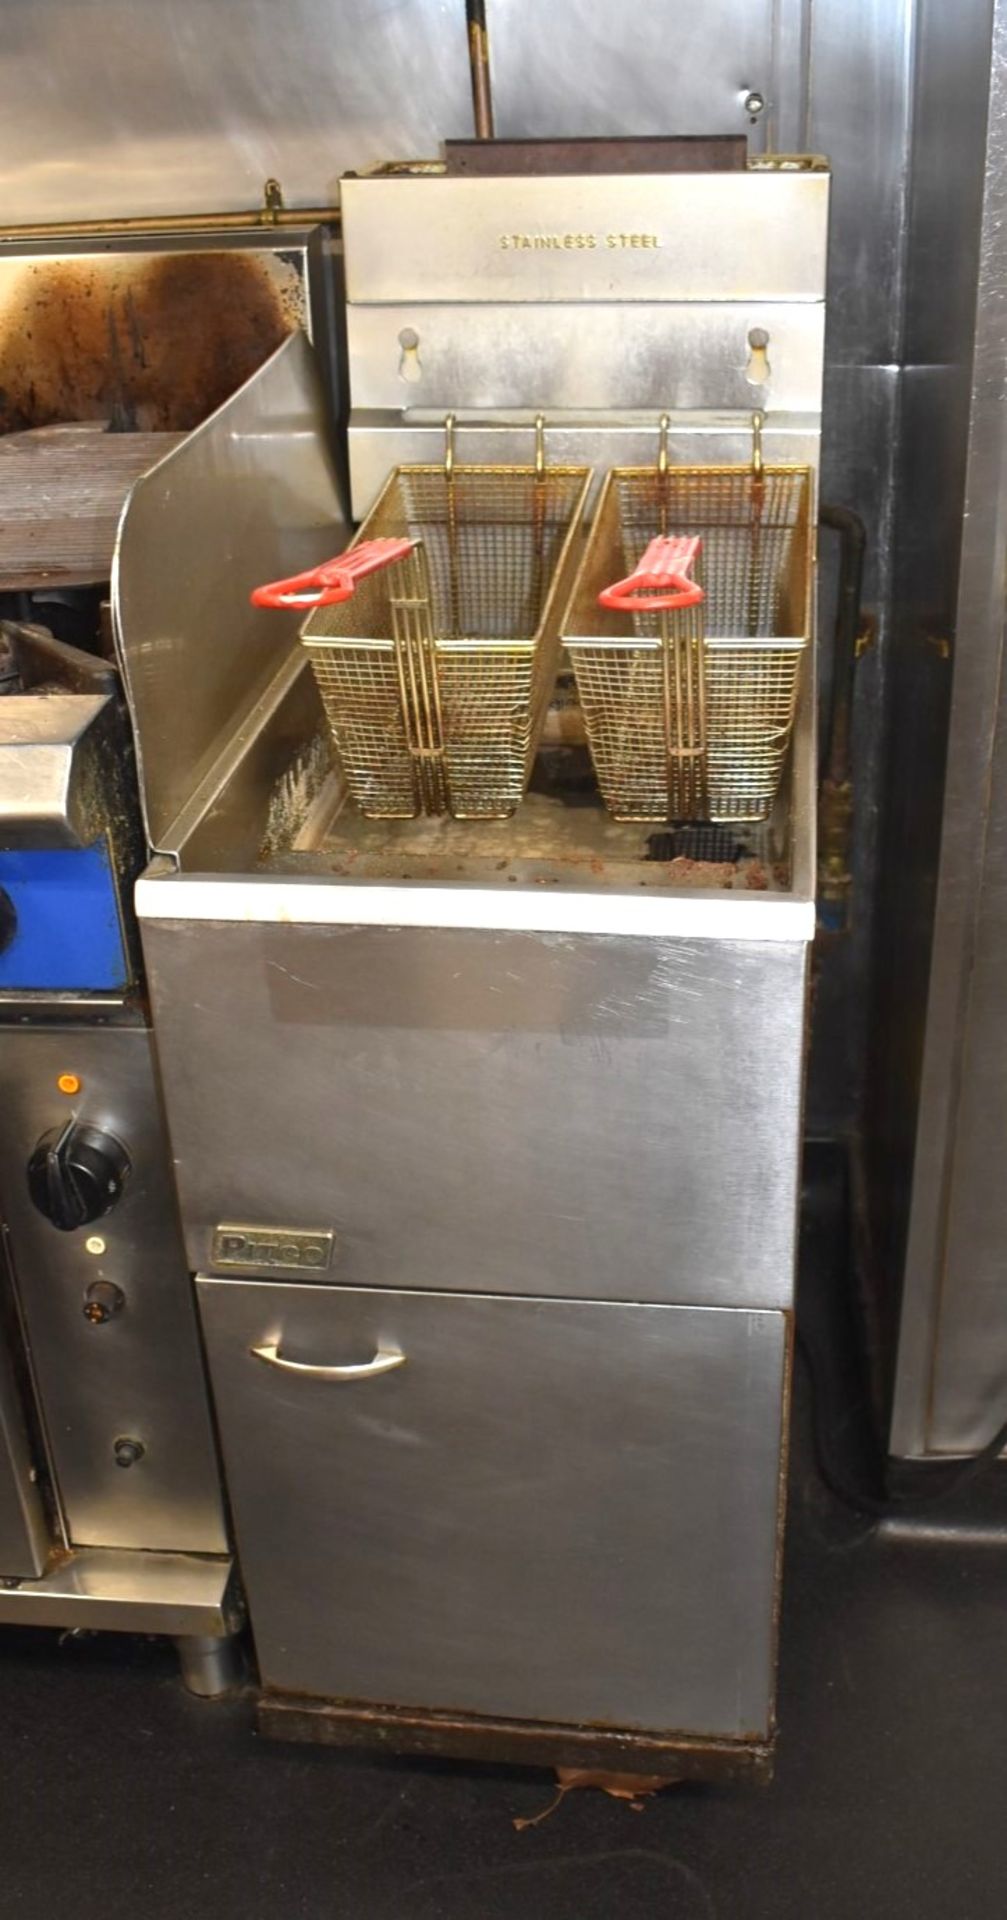 1 x Pitco 35C+ Single Tank 40cm Gas Fryer With Baskets - Image 2 of 5